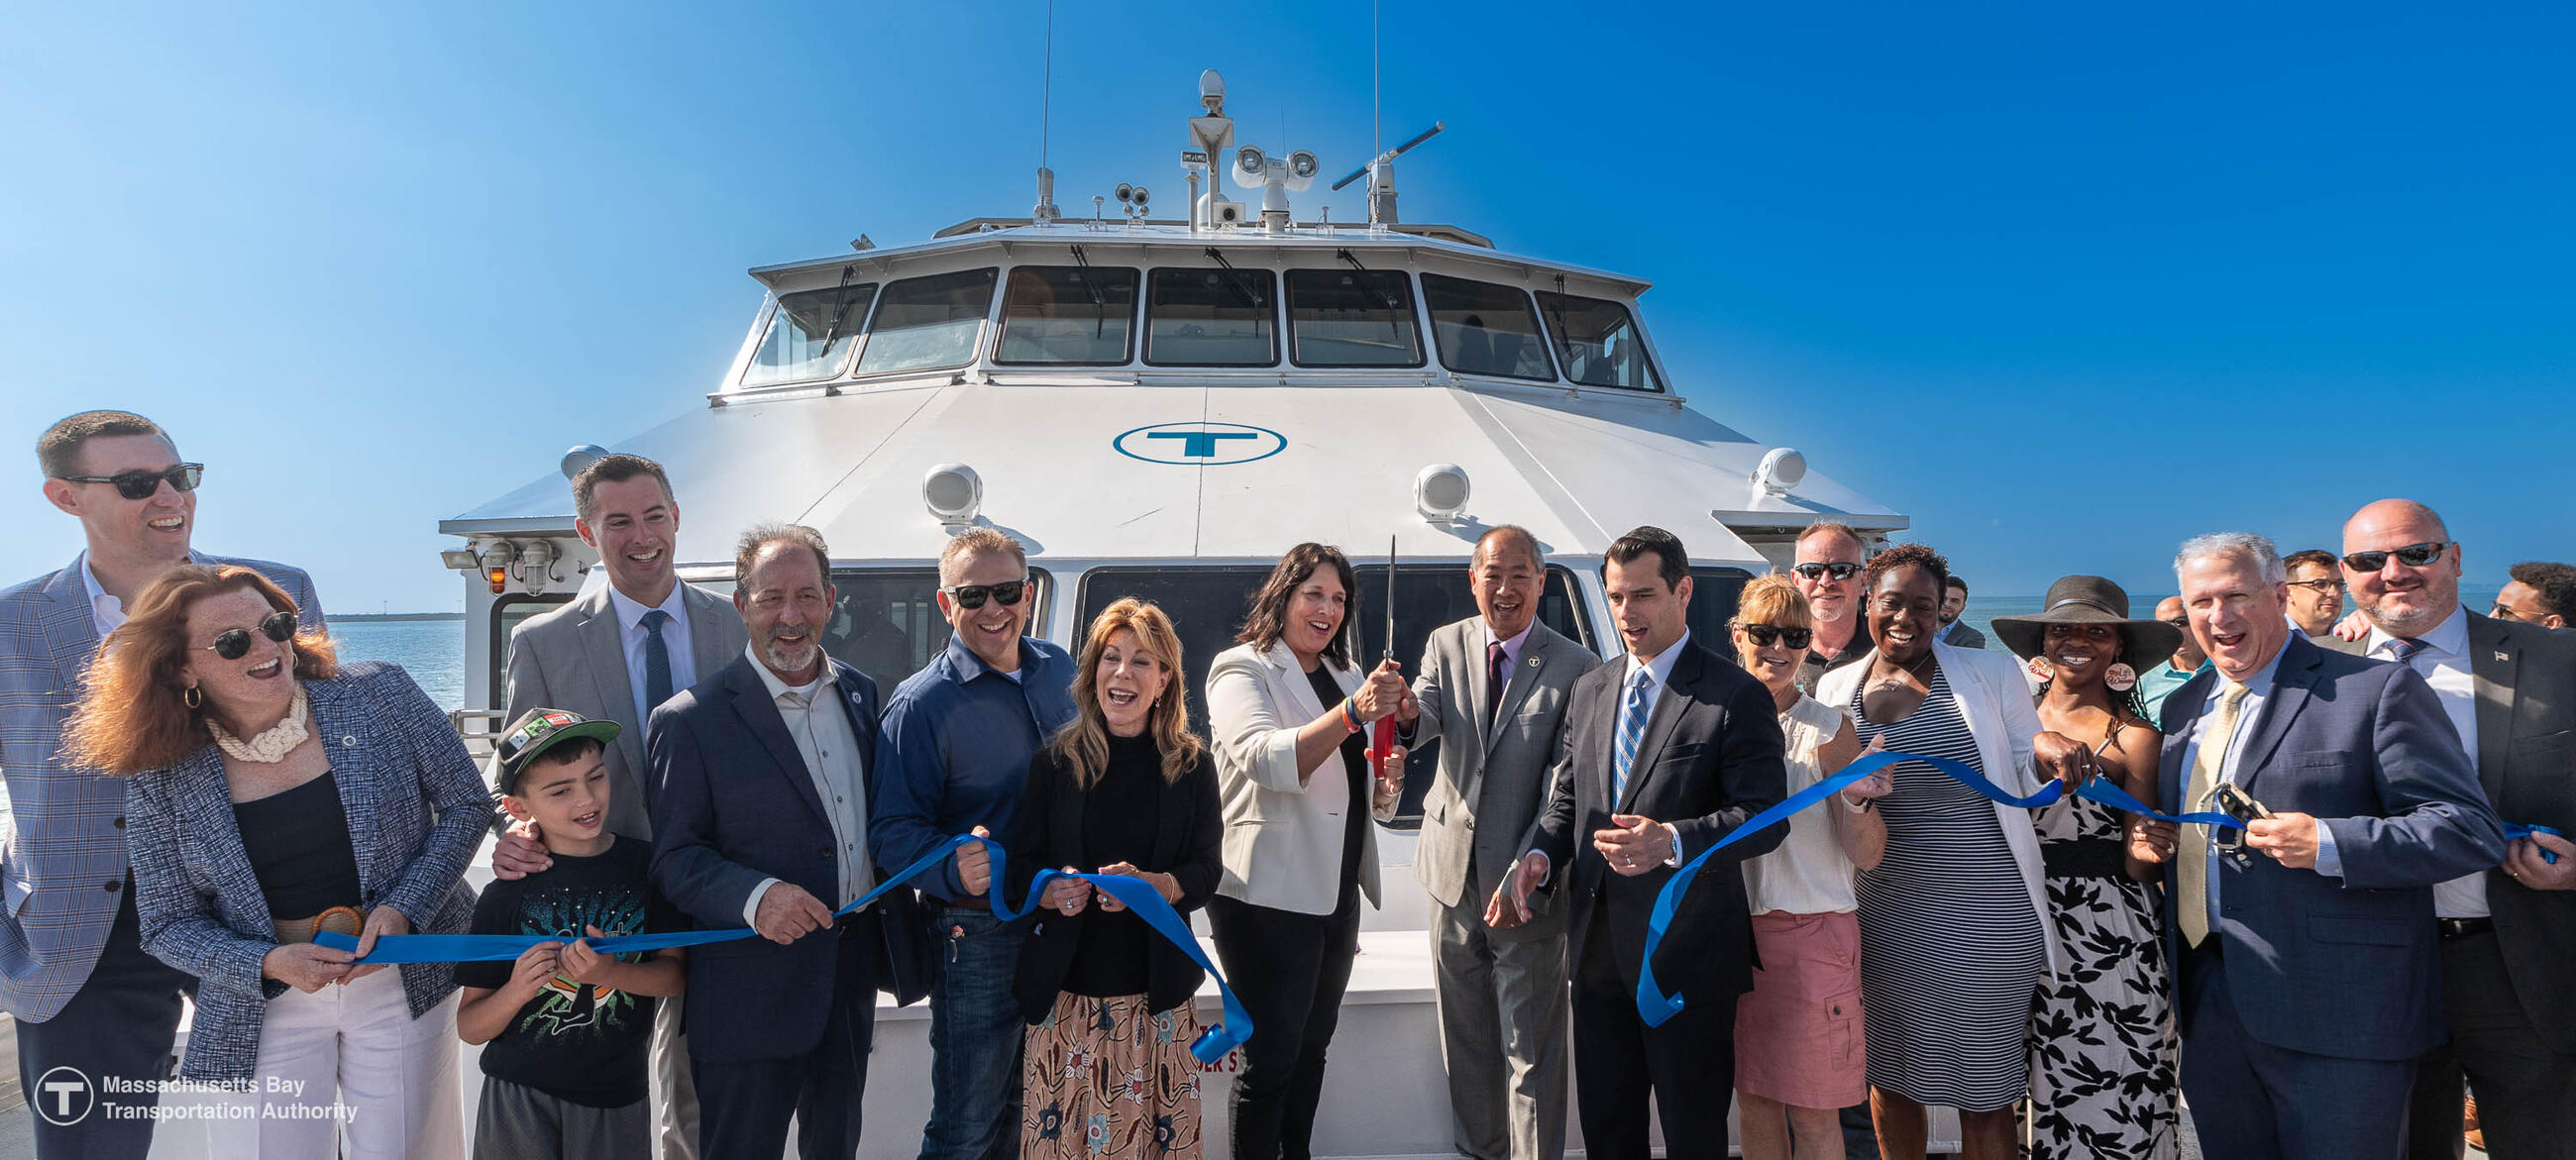 Lieutenant Governor Driscoll, state officials, elected leaders, and others joined MassDOT Secretary Fiandaca and MBTA General Manager Eng for a ceremonial ribbon-cutting today at the Lynn Ferry.